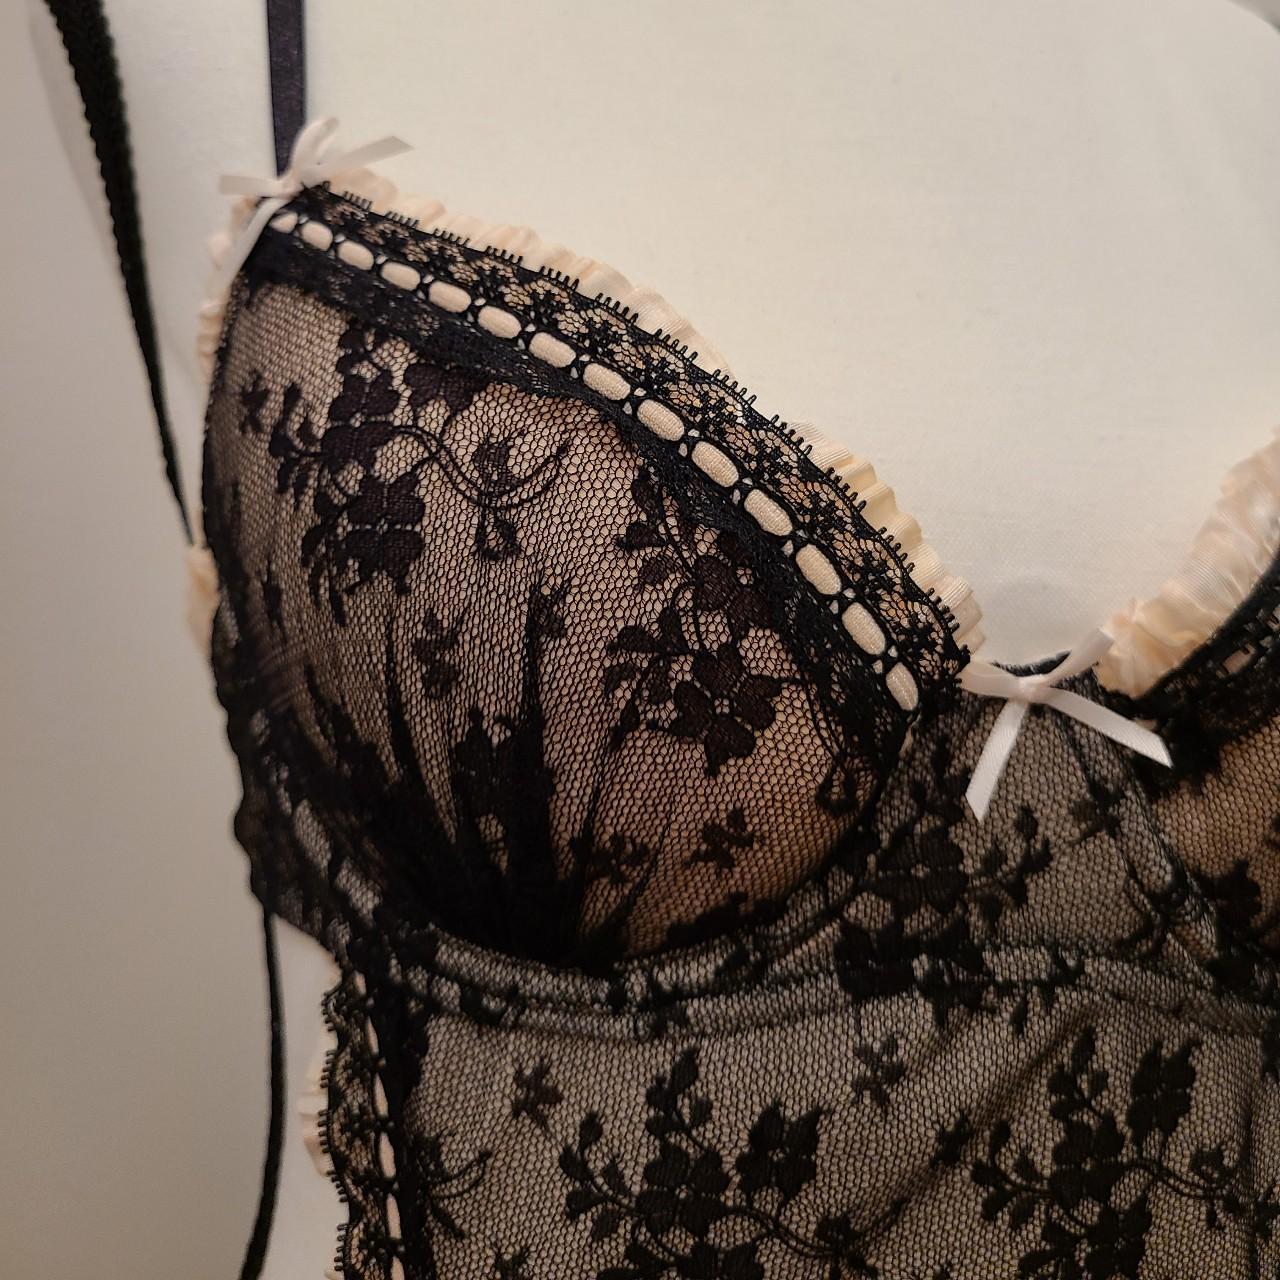 Victoria’s Secret Sexy Little Things French Maid